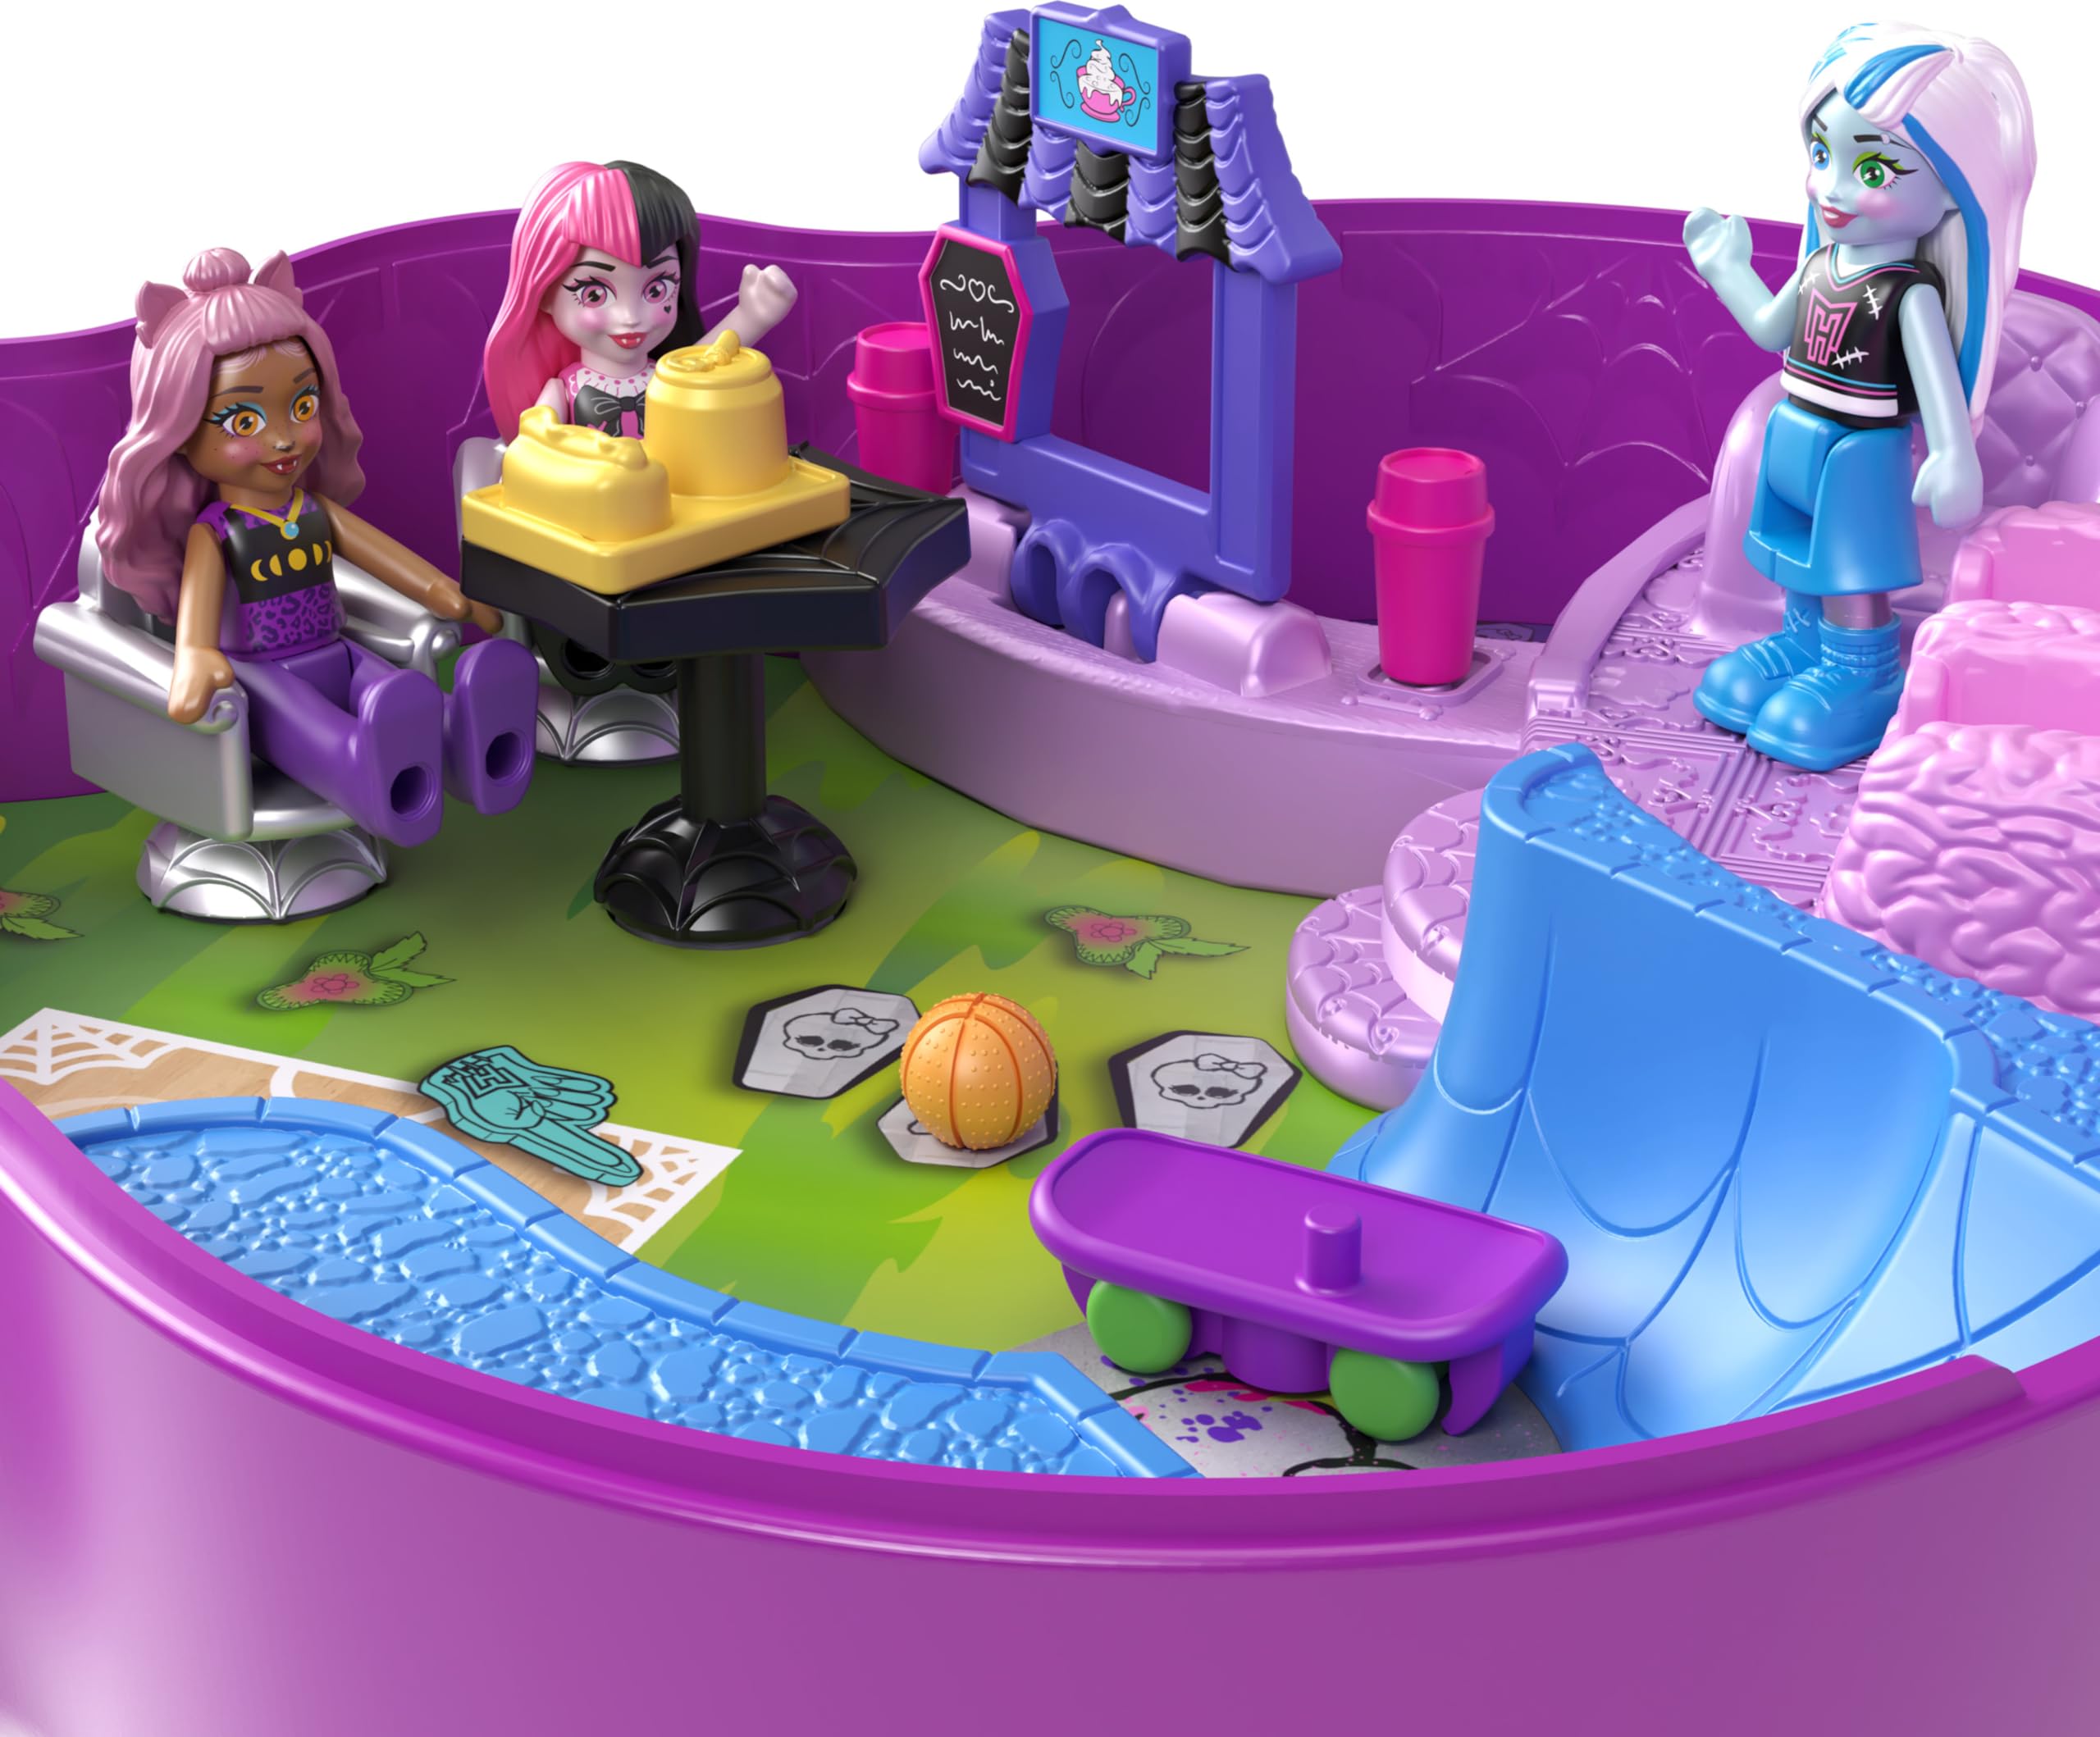 ​Polly Pocket Monster High Playset with 3 Micro Dolls & 10 Accessories, Opens to High School, Collectible Travel Toy with Storage